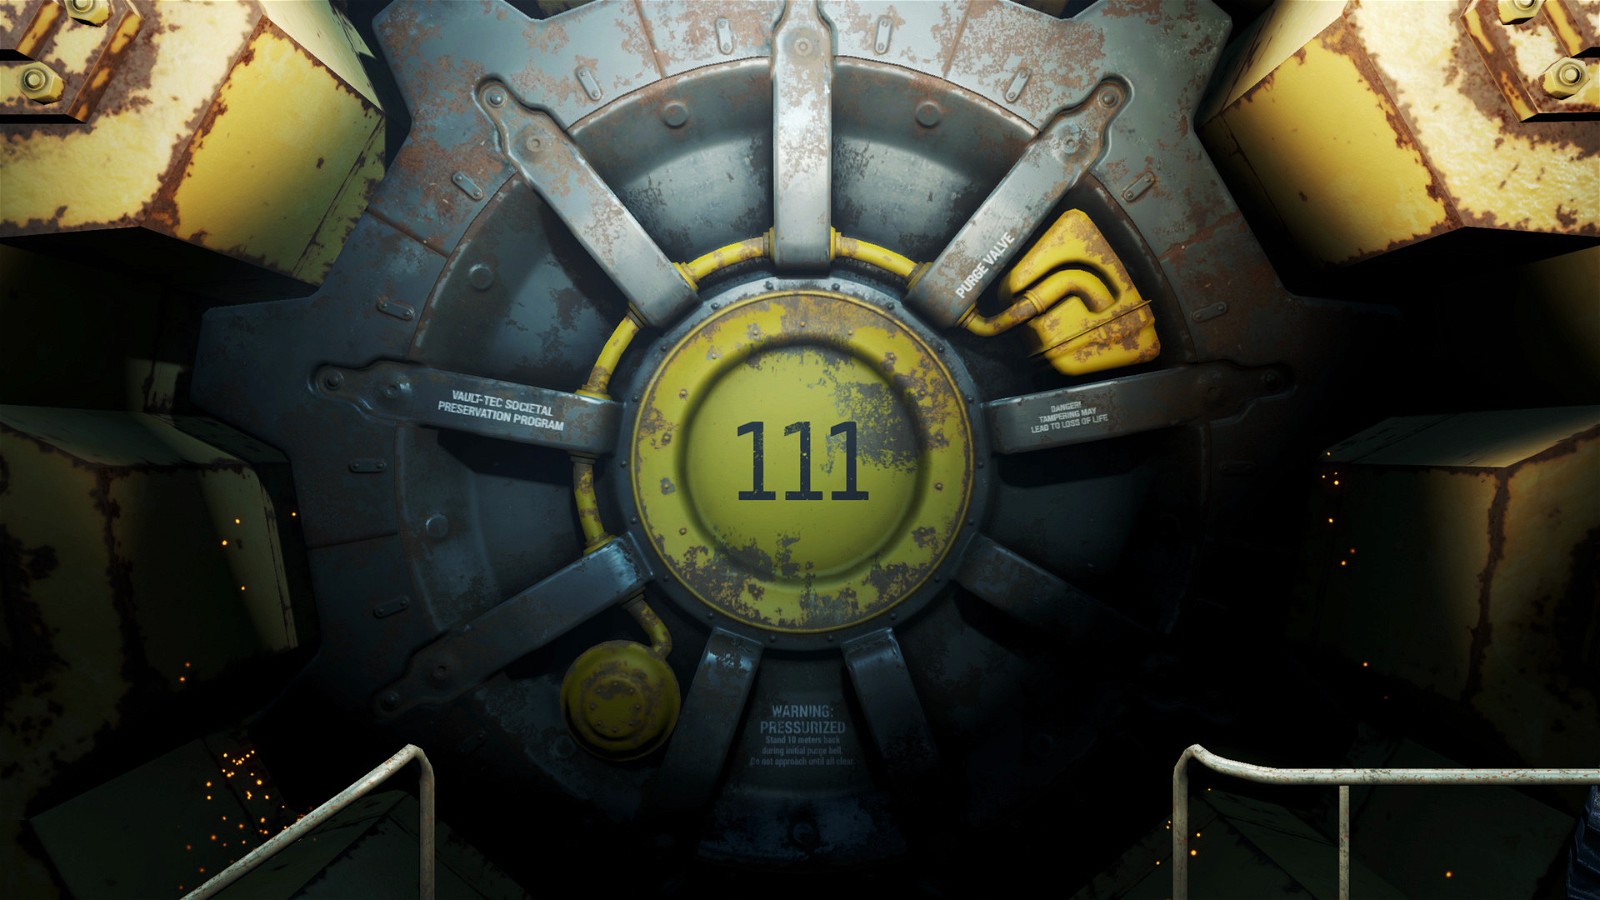 the game was a major success and also fulfilled Howard's wish as players can avoid killing most of the enemies in Fallout 4. 